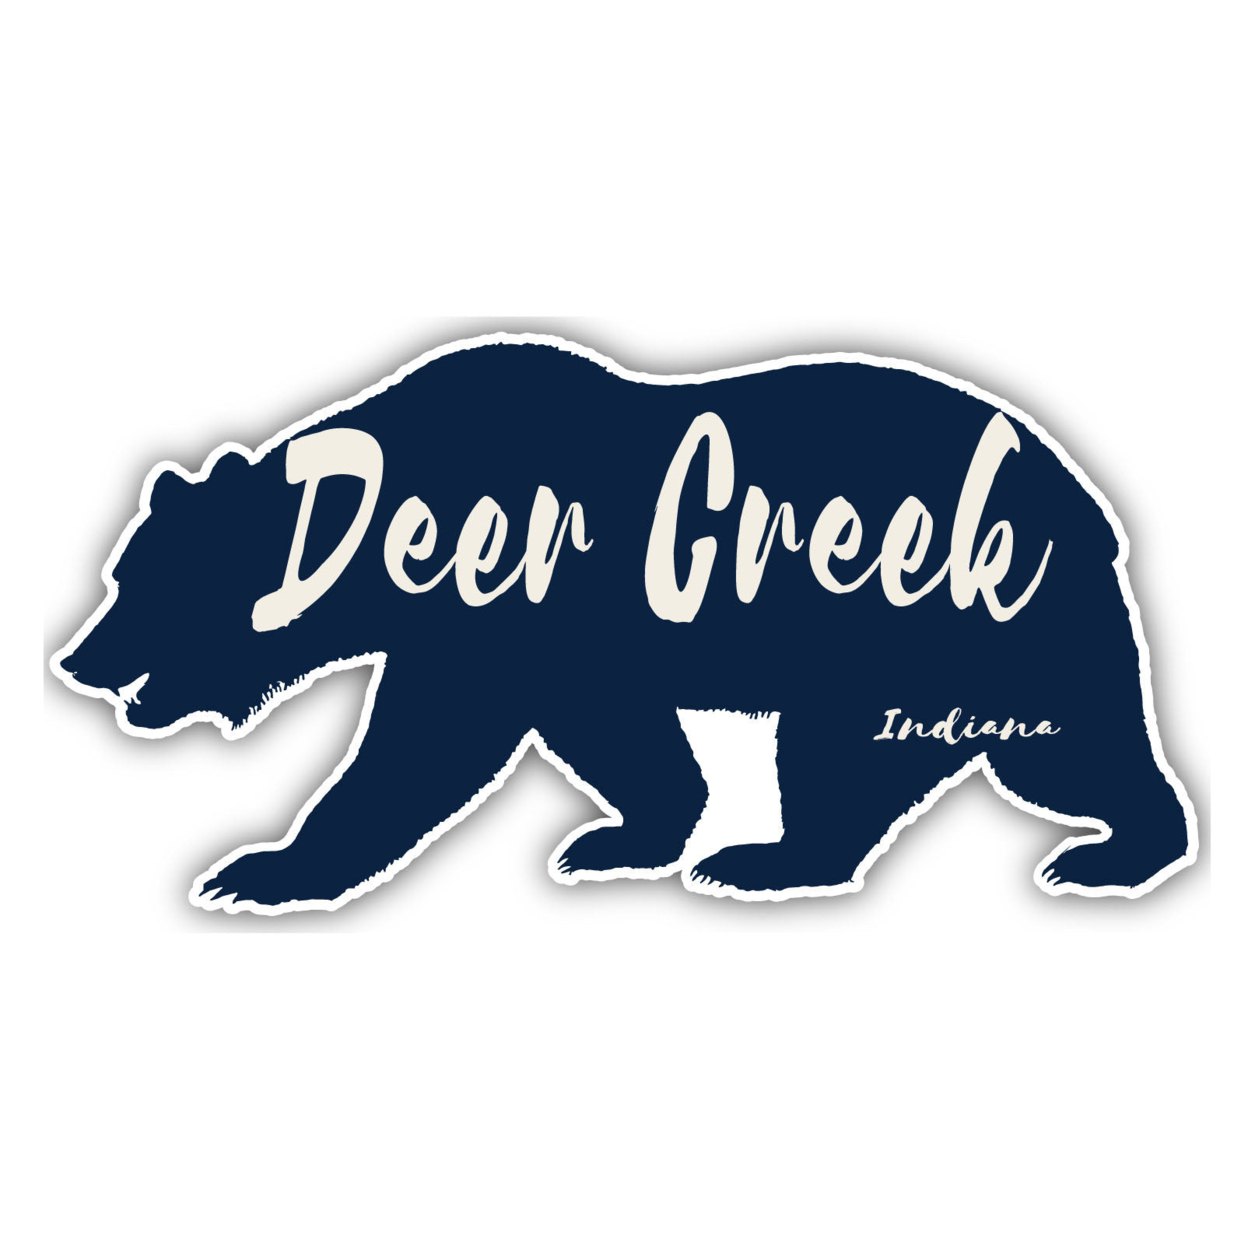 Deer Creek Indiana Souvenir Decorative Stickers (Choose Theme And Size) - 4-Pack, 6-Inch, Great Outdoors